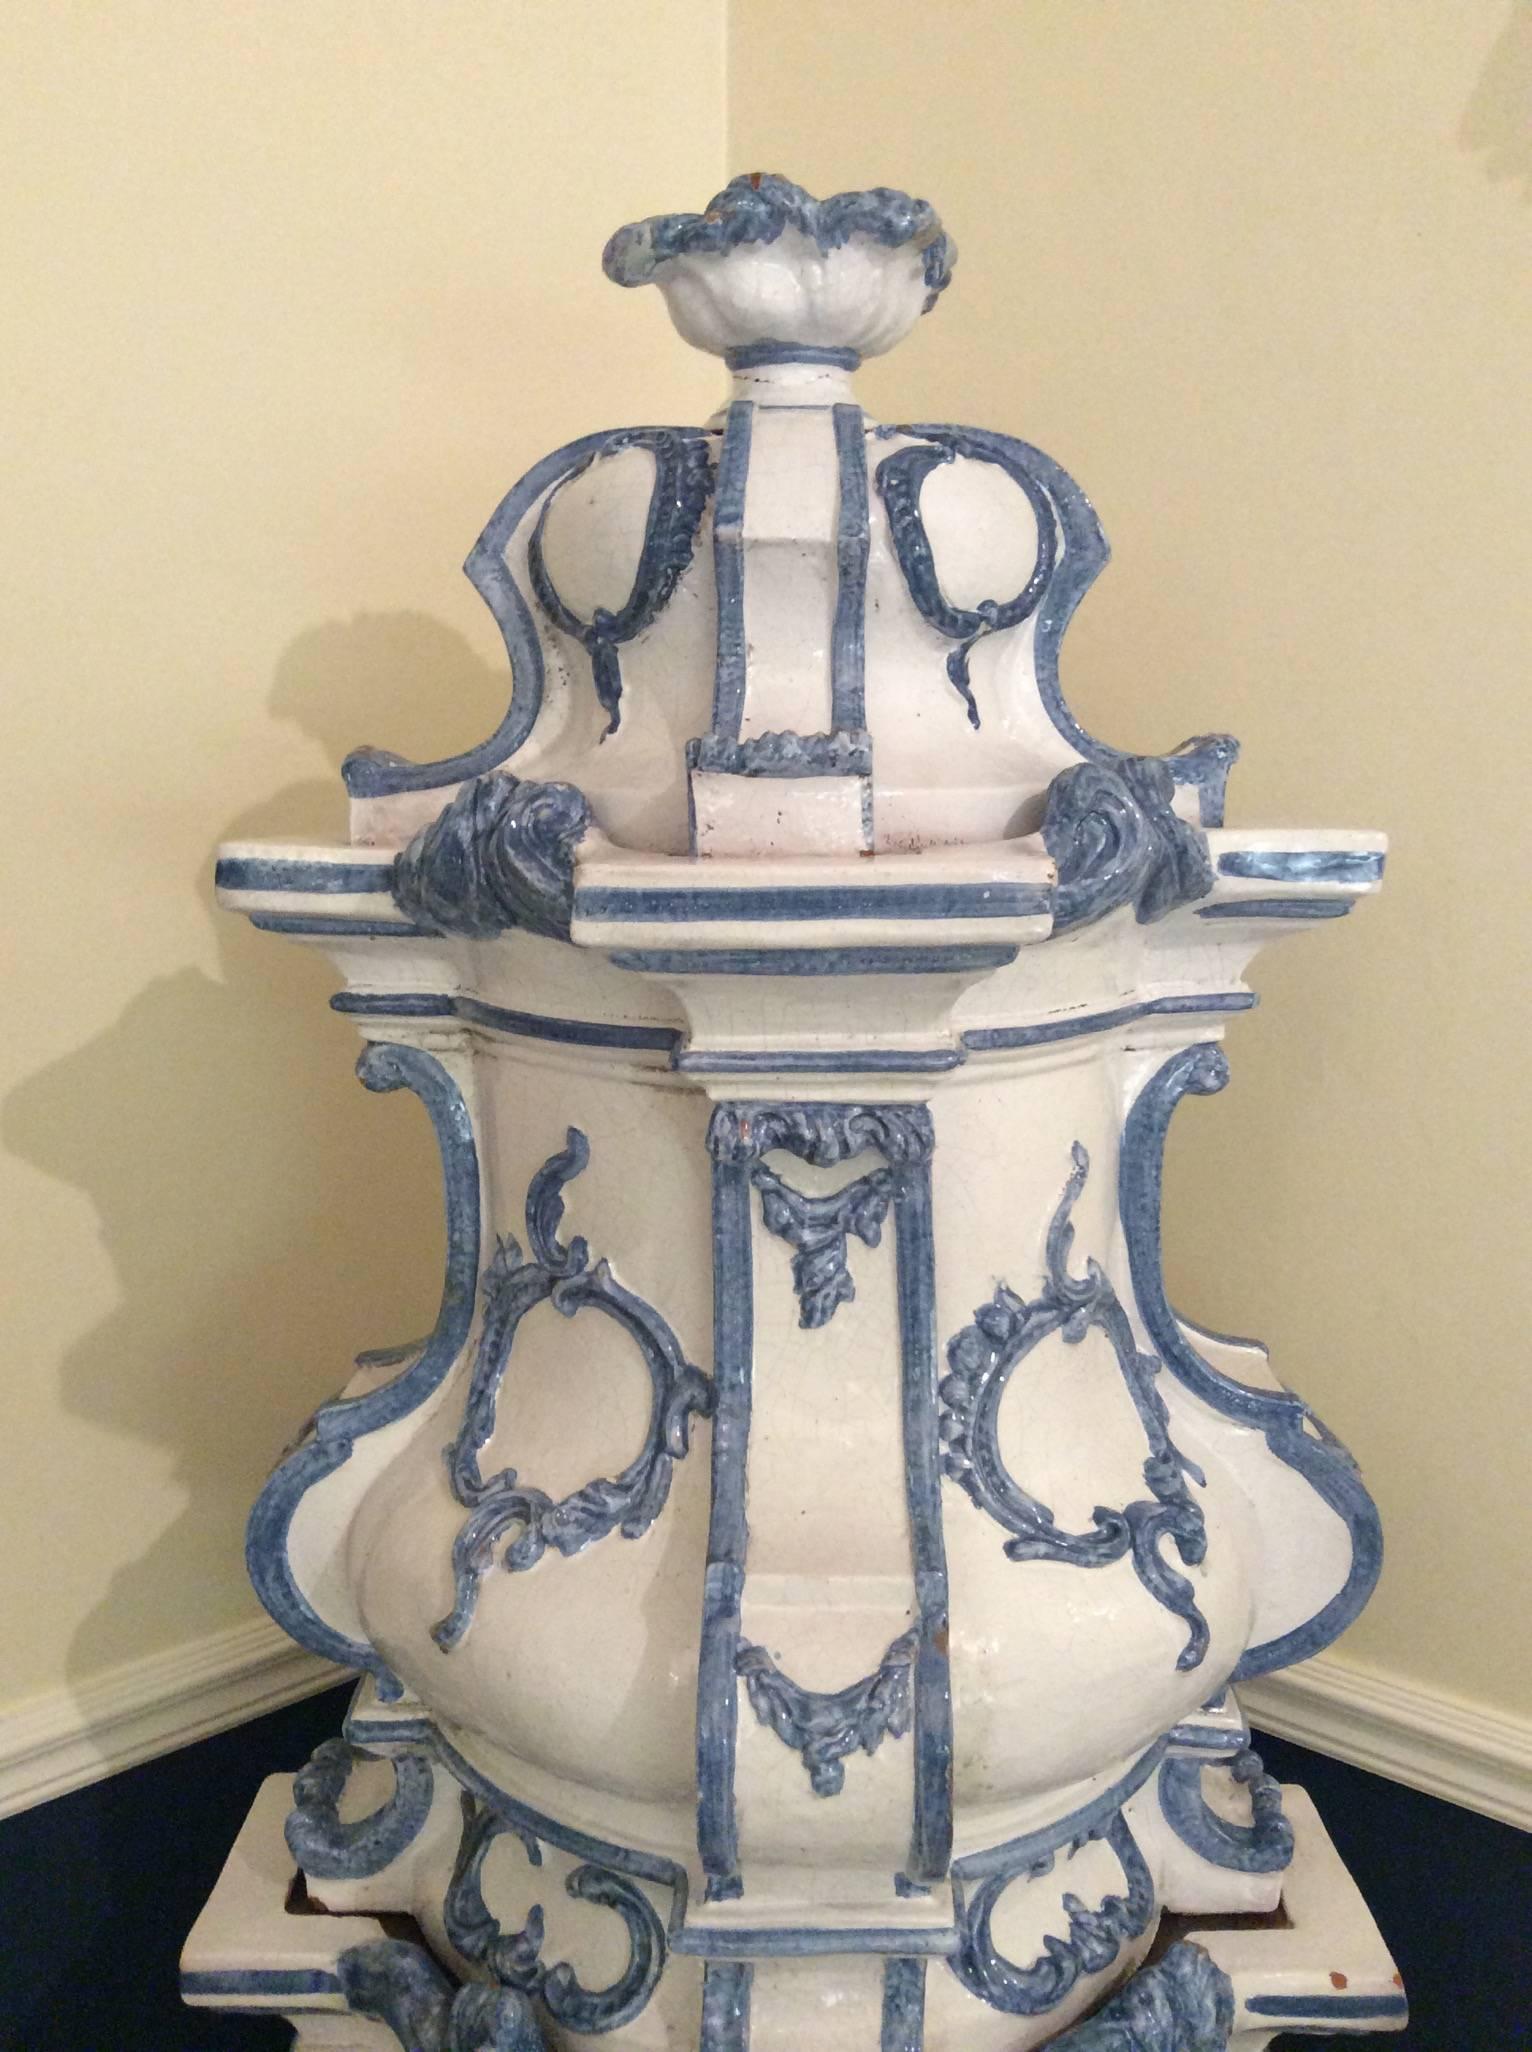 A large late 19th century South German or Austrian majolica-faience stove or kachelofen in the Rococo style.
Built in nine sections of typical Bombe format, fired in white with light blue floral decoration, complete with iron firebox door and